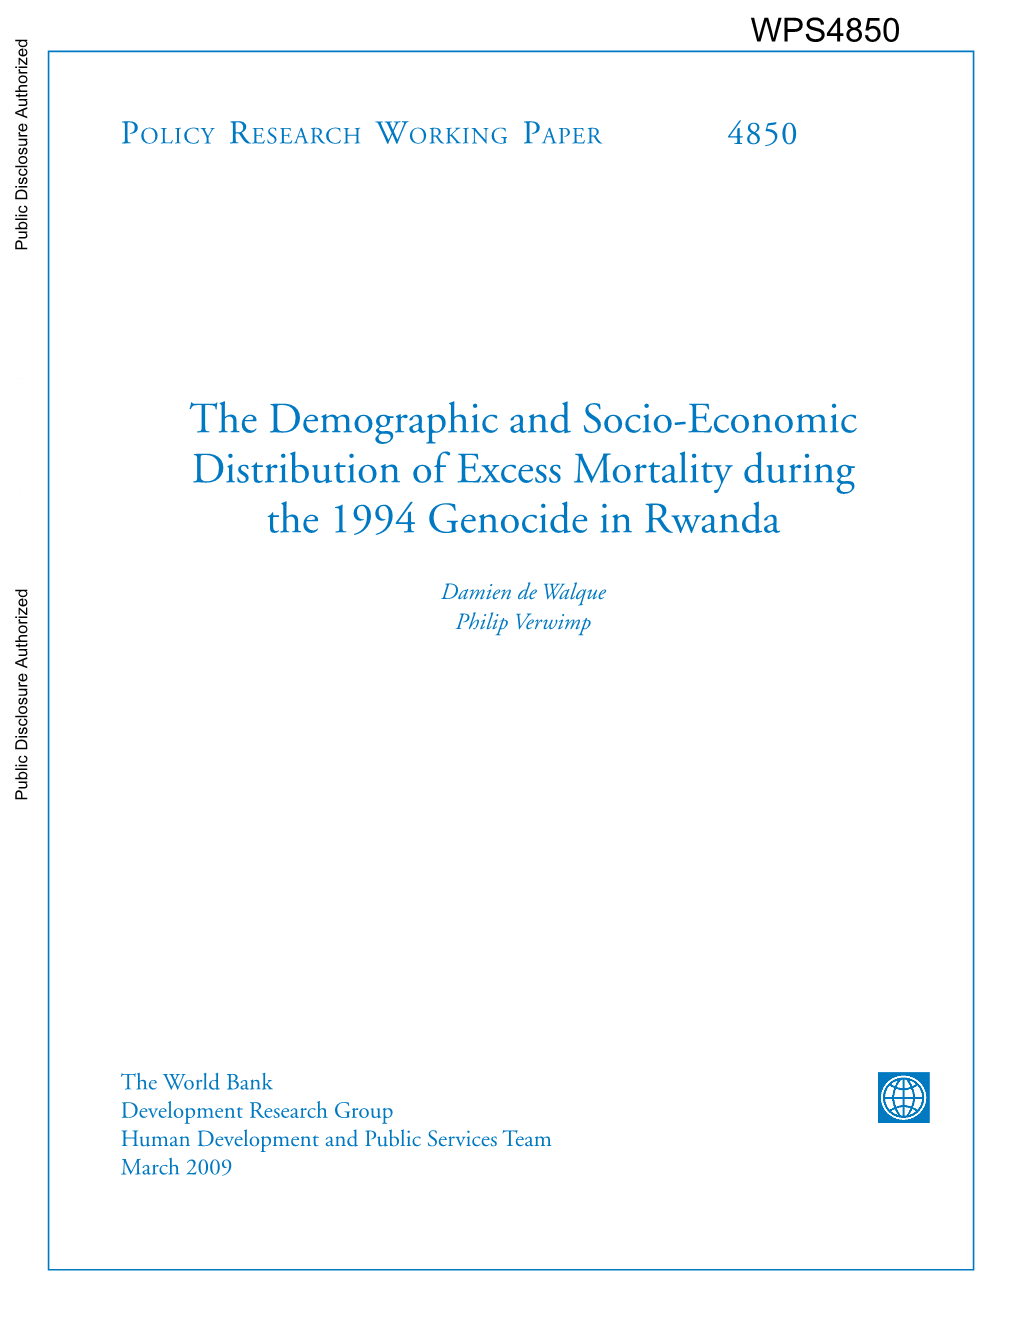 The Demographic and Socio-Economic Distribution of Excess Mortality During